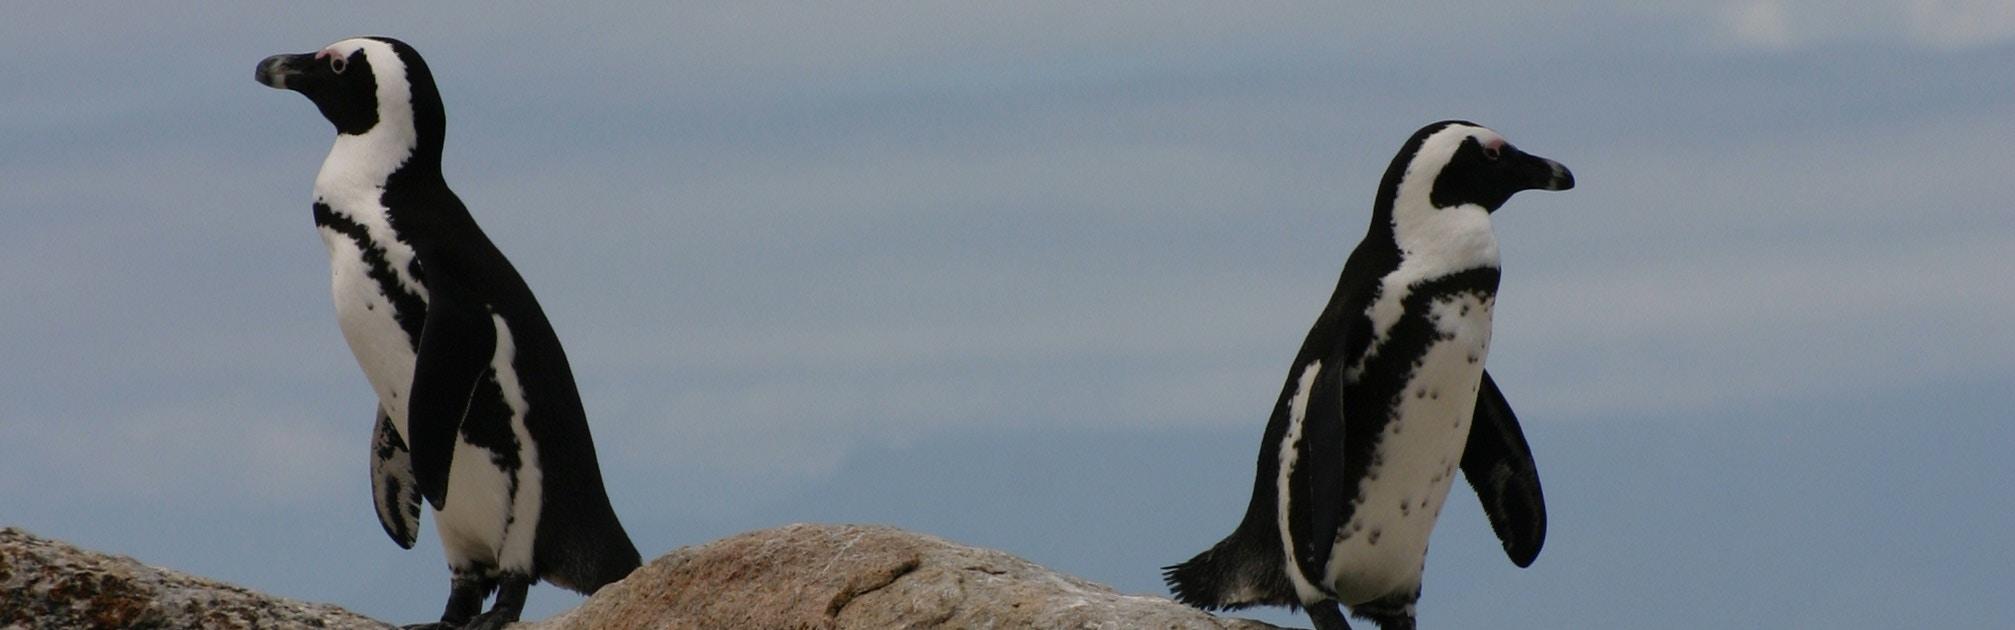 Two penguins on top of a rock facing opposite directions